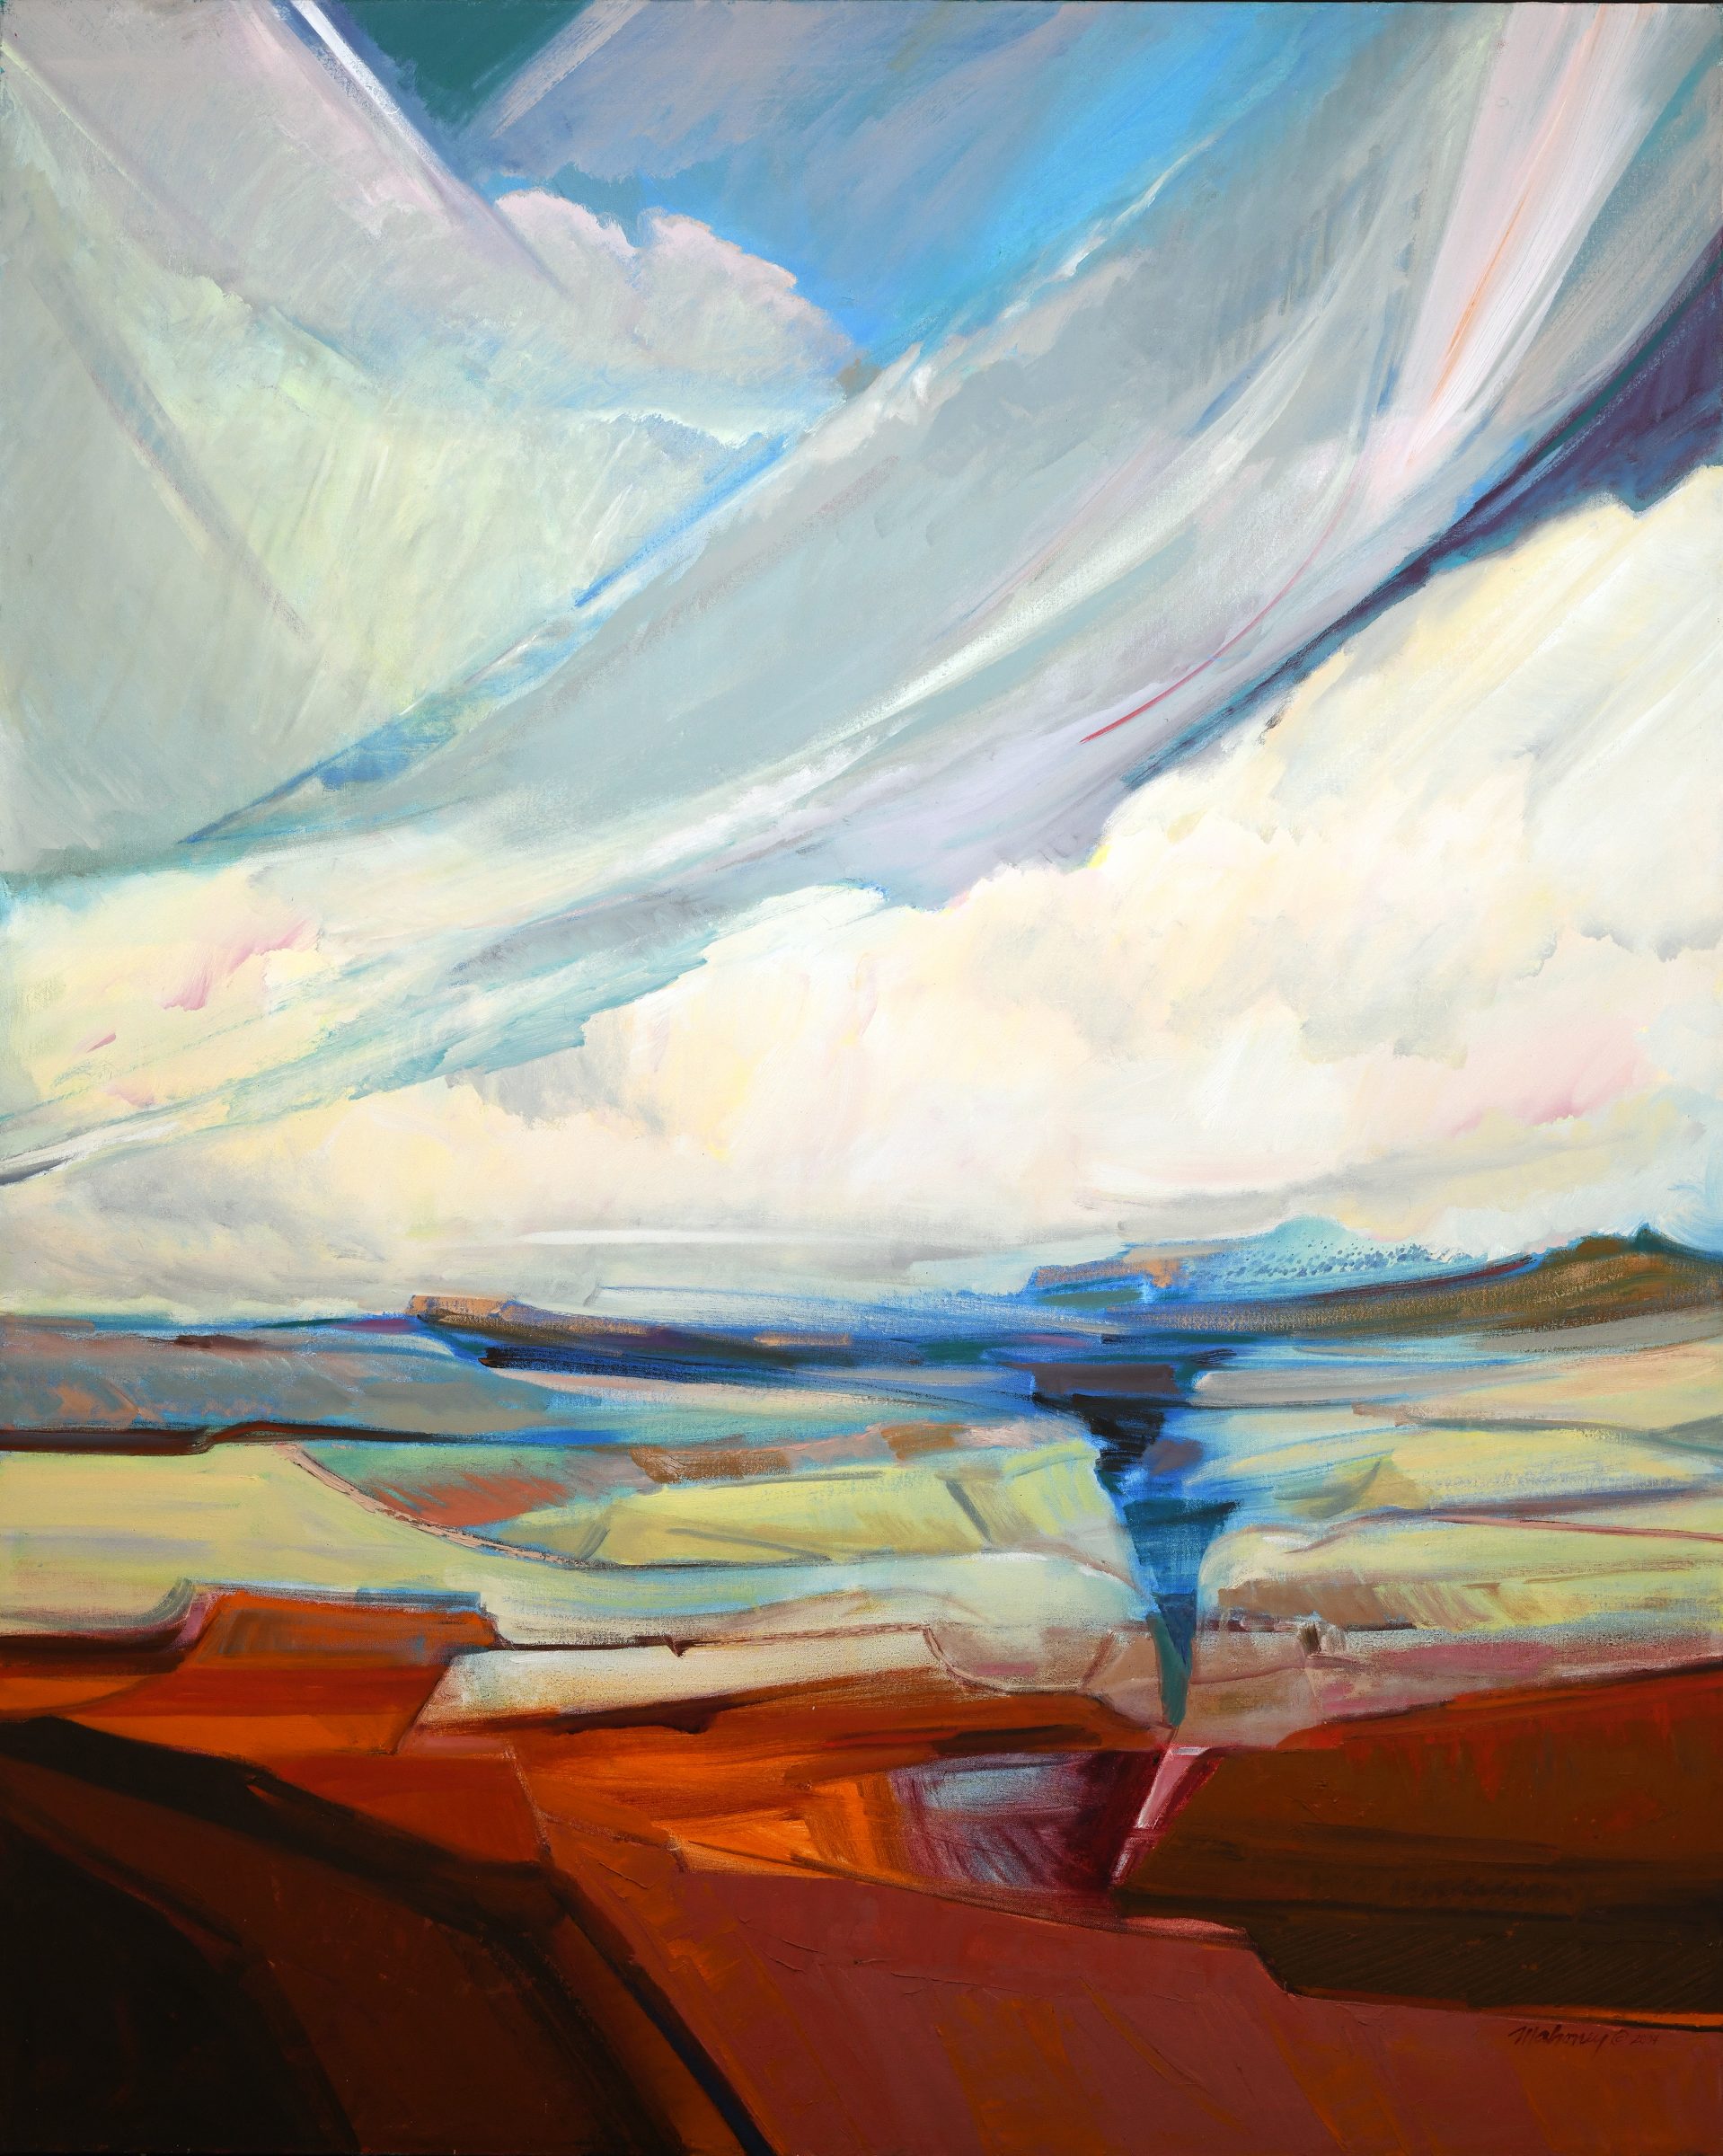 Joella Jean mahoney's Rift Canyon painting - red orange cliffs beneith a sweeping blue/turquoise sky with clouds